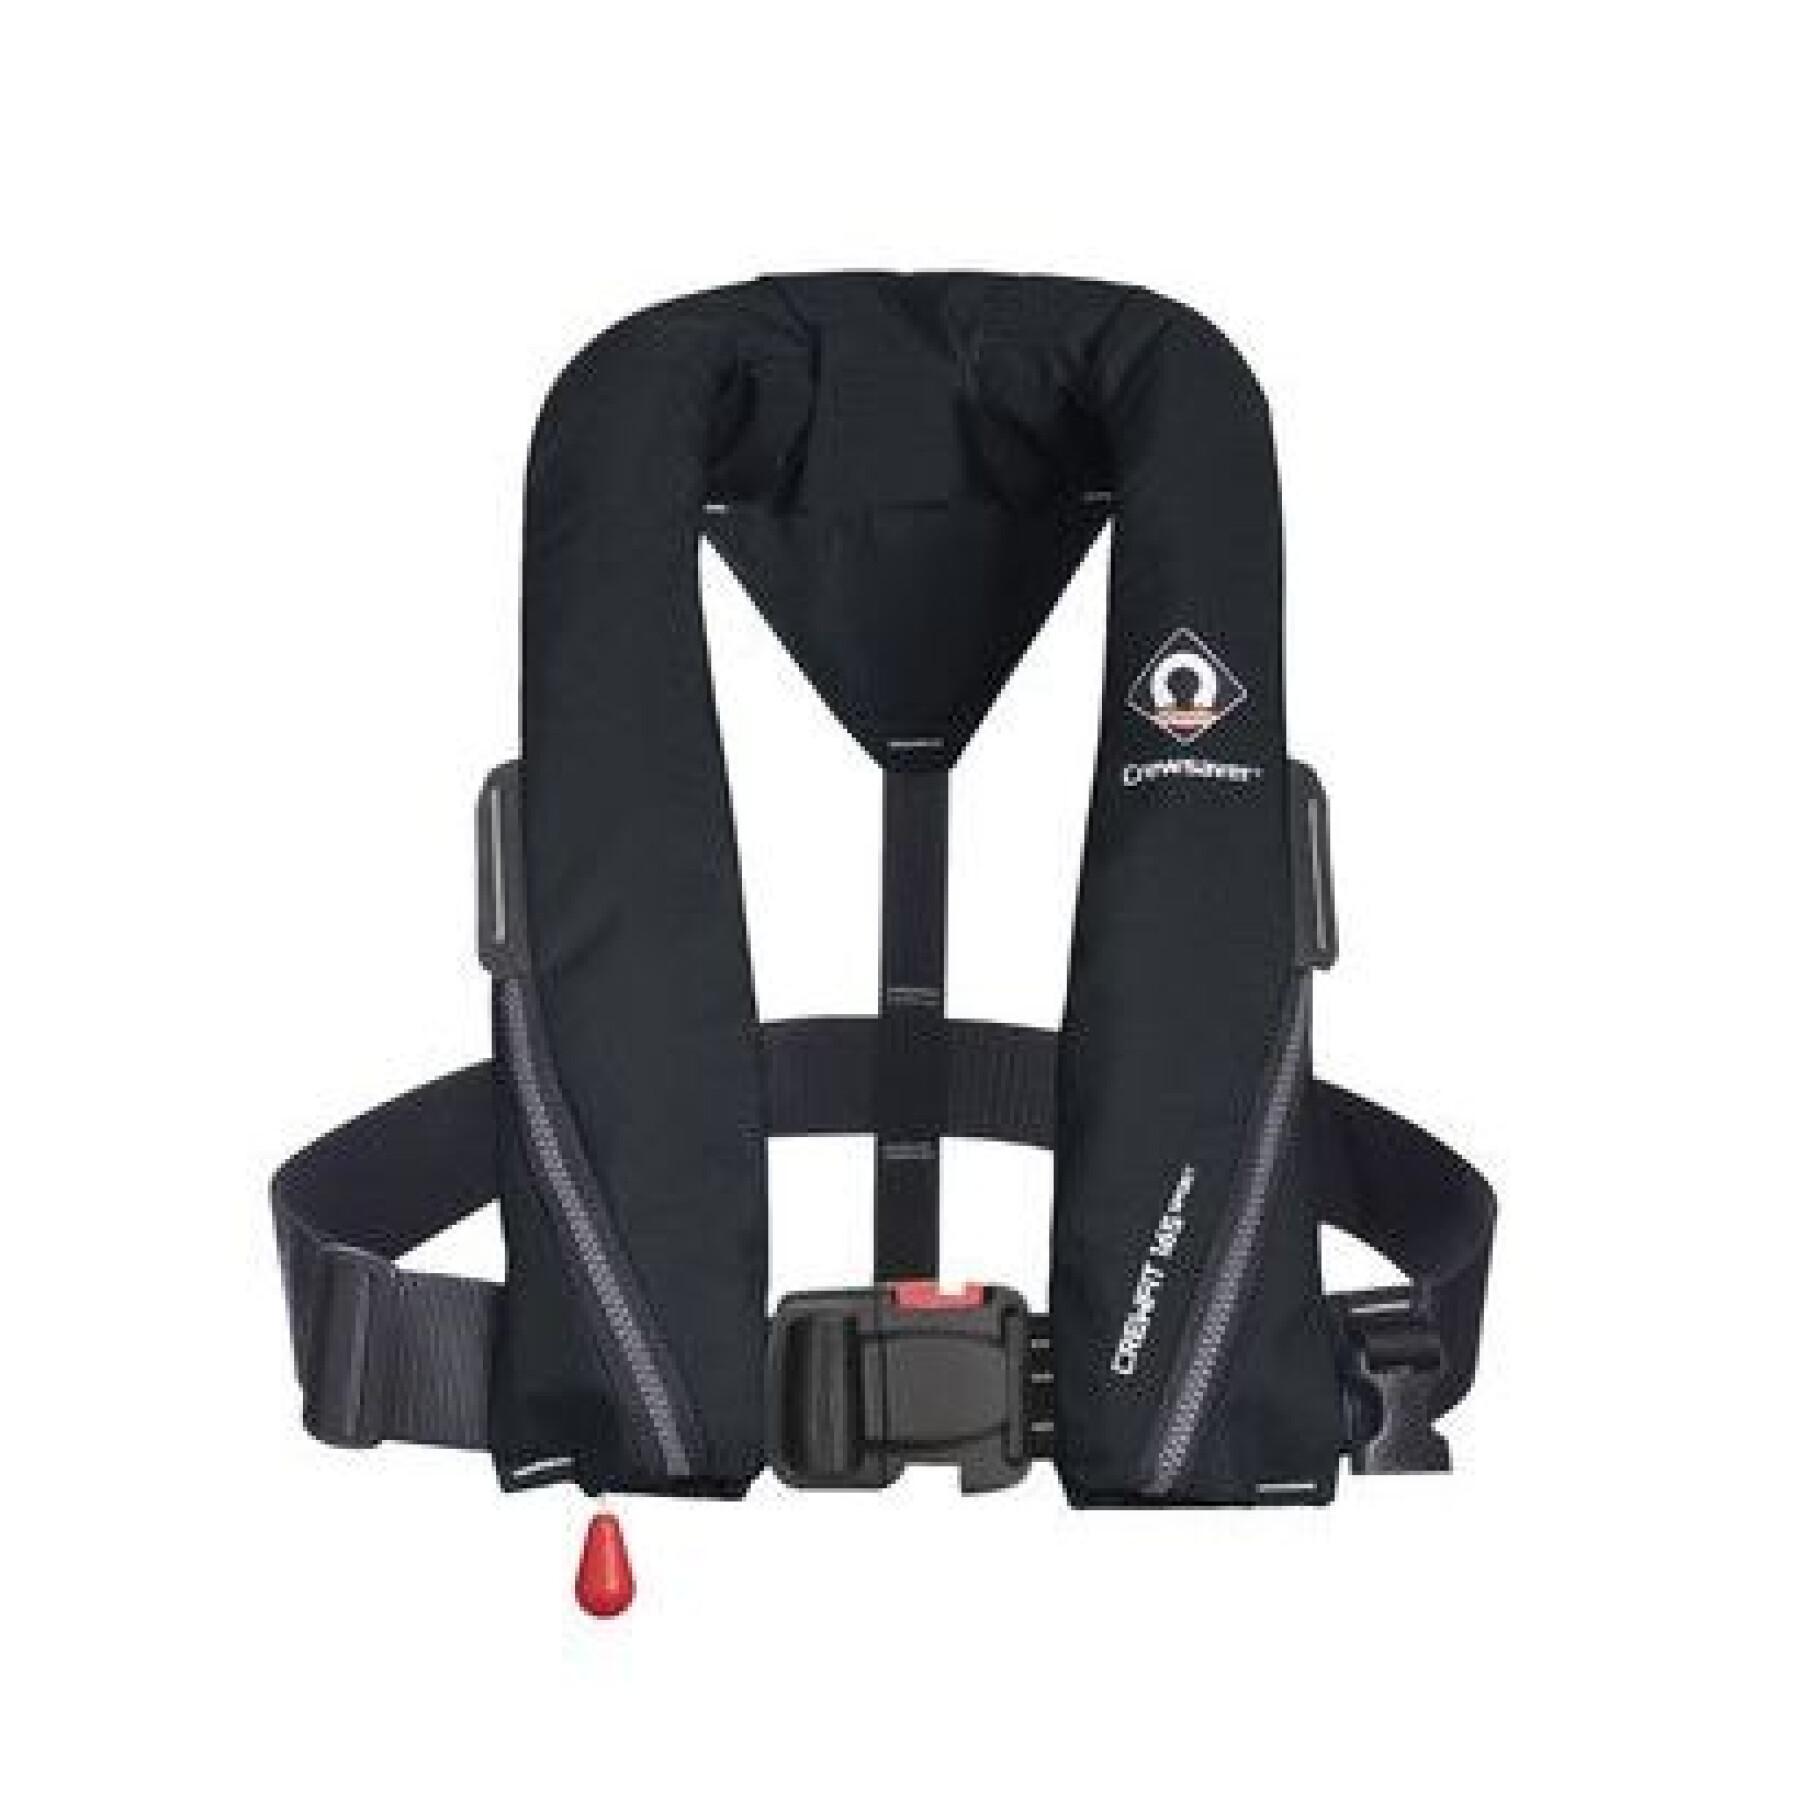 Manual lifejacket without harness Crewsaver Crewfit 165N